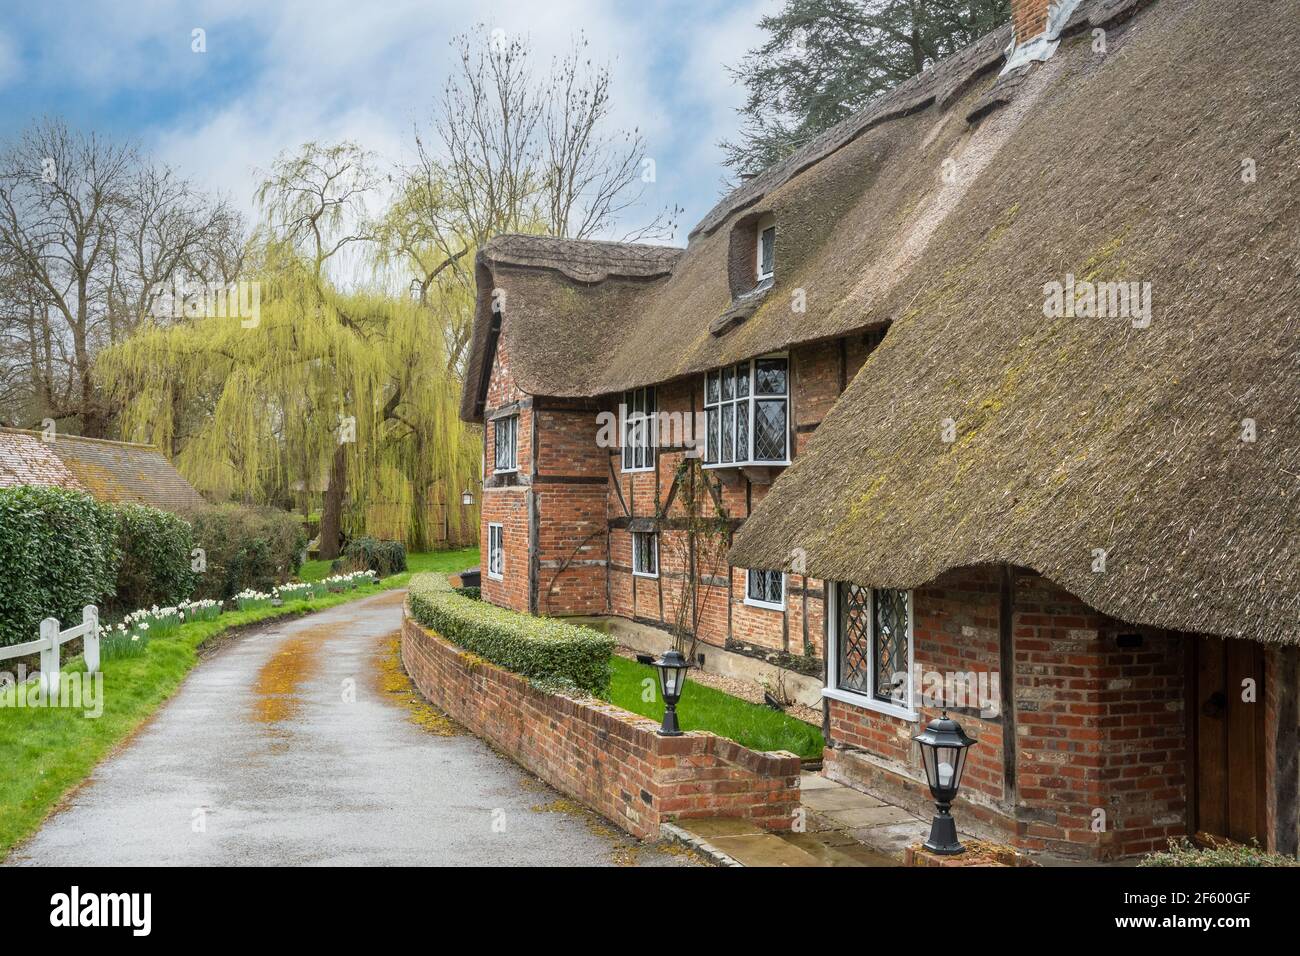 Historic 17th century grade II listed thatched cottages called The Barracks in Dogmersfield village, Hampshire, England, UK Stock Photo